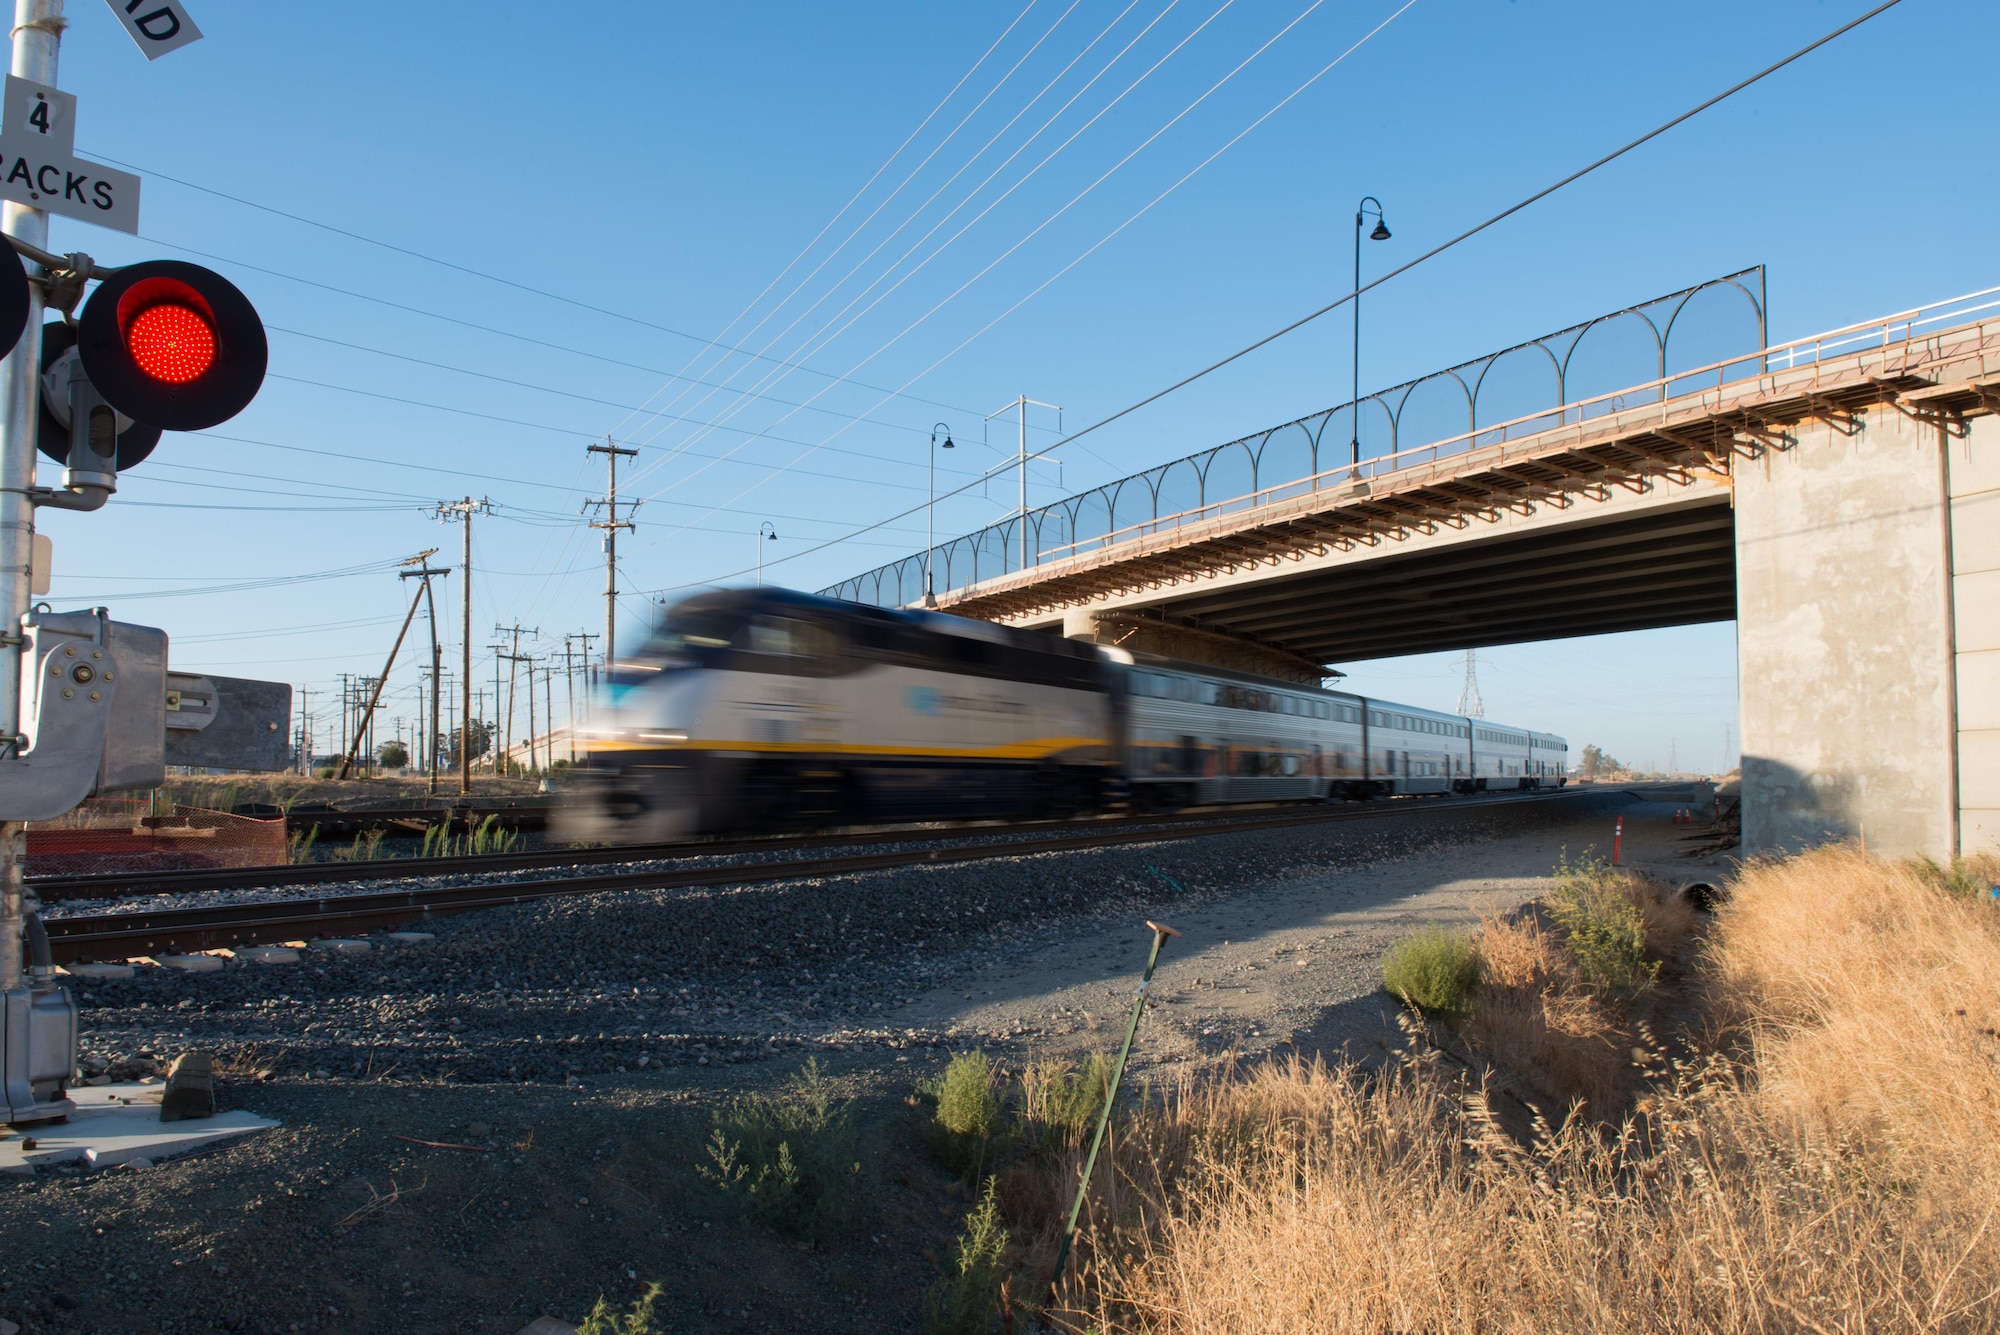 An Amtrak train speeds under the newly constructed Peabody Road overpass after the reopening ceremony in Fairfield, California, Aug. 4, 2016. The road was closed for 14-months and finished ten days ahead of schedule. Peabody Road is a major thoroughfare that connects the cities of Vacaville and Fairfield, more than 20,000 vehicles per day use the road and it is also a major artery into Travis Air Force Base for more than 14,000 employees. The construction of the Peabody Road overpass is part of the new Fairfield-Vacaville train station project along the Capitol Corridor. (U.S. Air Force photo by Louis Briscese) 